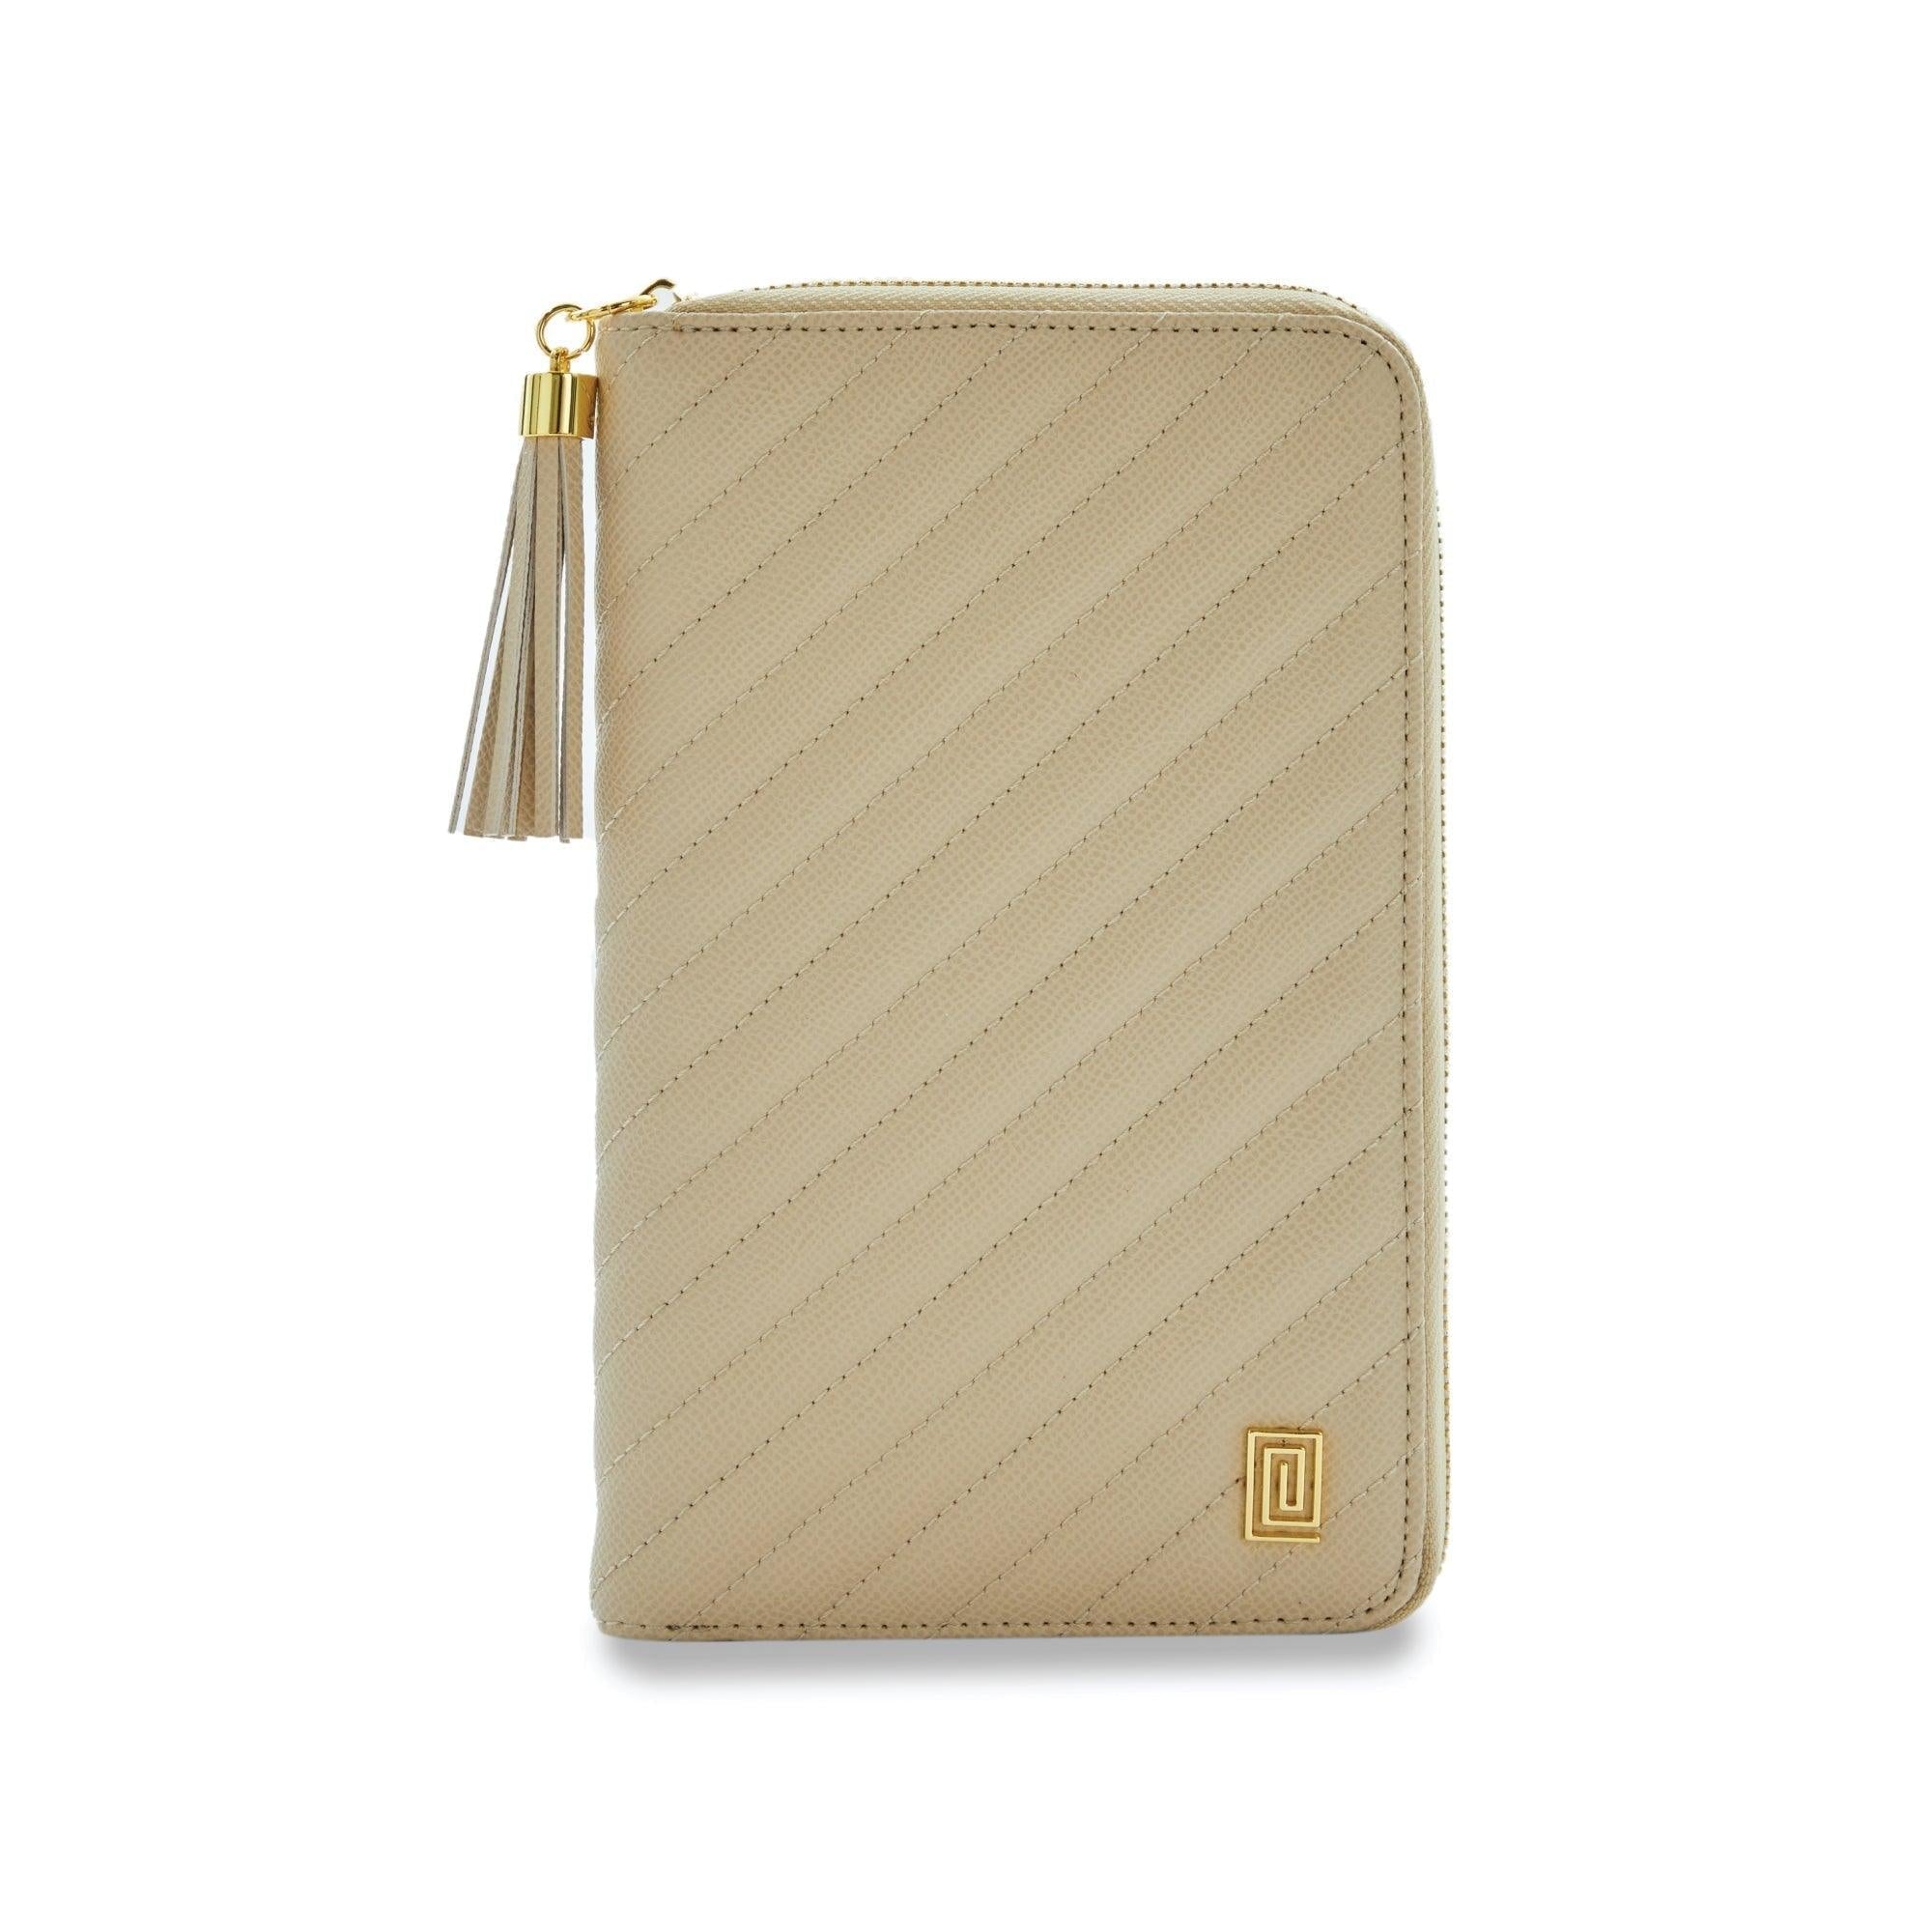 Bisque Quilted Slim Compact | OUTLET | SL7. Slim Compact Zip Wallet | Final Sale | NOTIQ